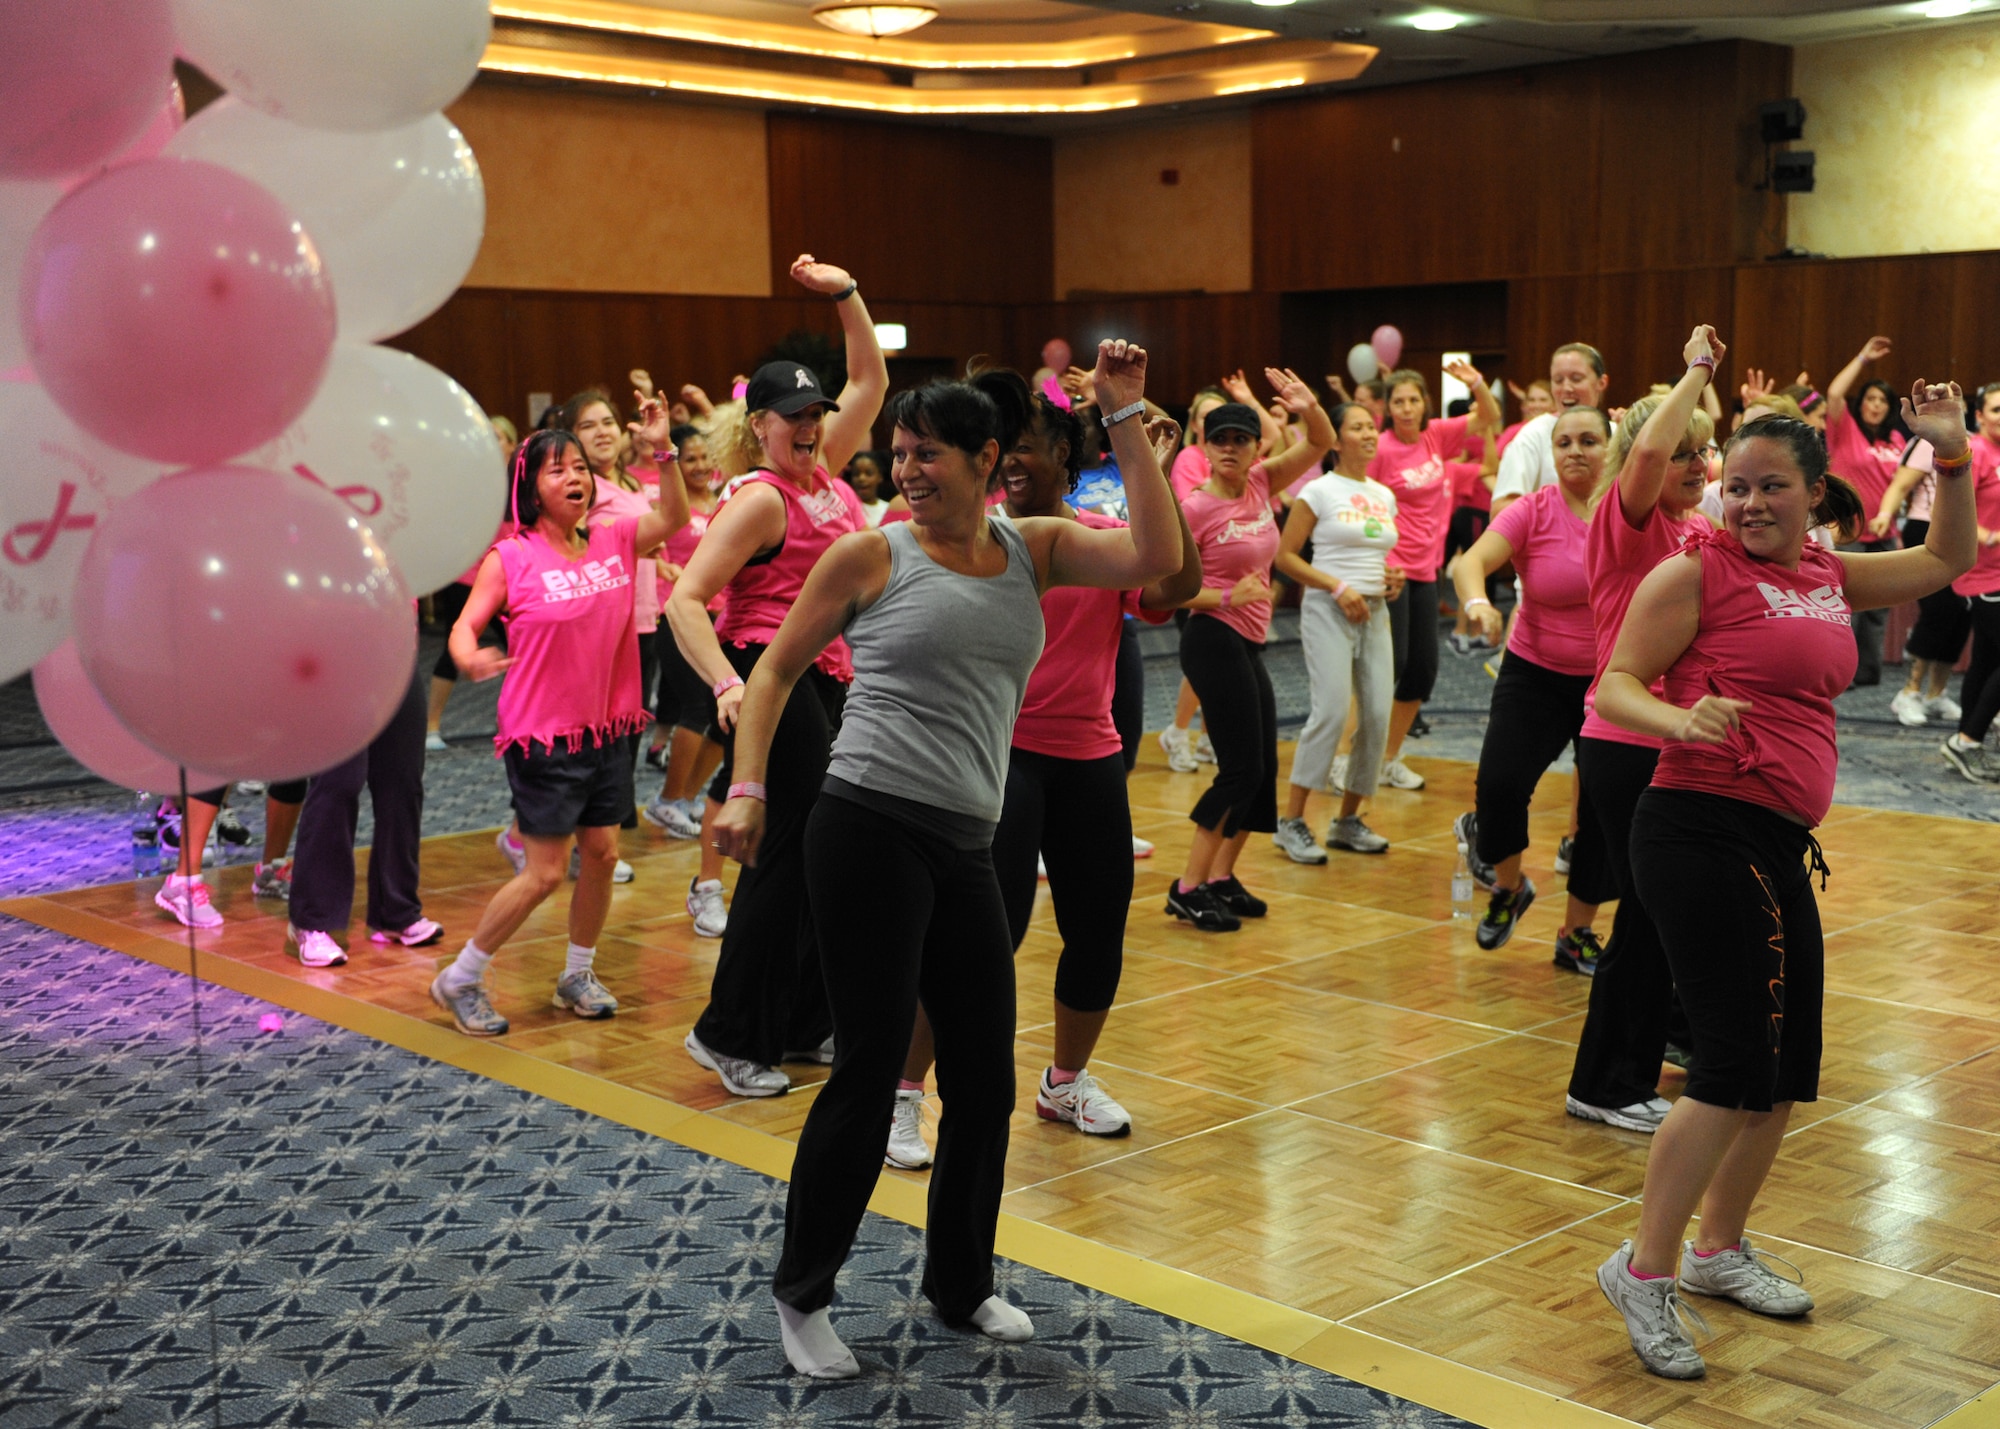 SPANGDAHLEM AIR BASE, Germany – More than 130 participants dance during the Zumba for a Cure event in support of Breast Cancer Awareness Month here Oct. 13. Zumba for a Cure raised more than $2,000 toward the Susan G. Komen Foundation for Breast Cancer Research. (U.S. Air Force photo/Senior Airman Christopher Toon)